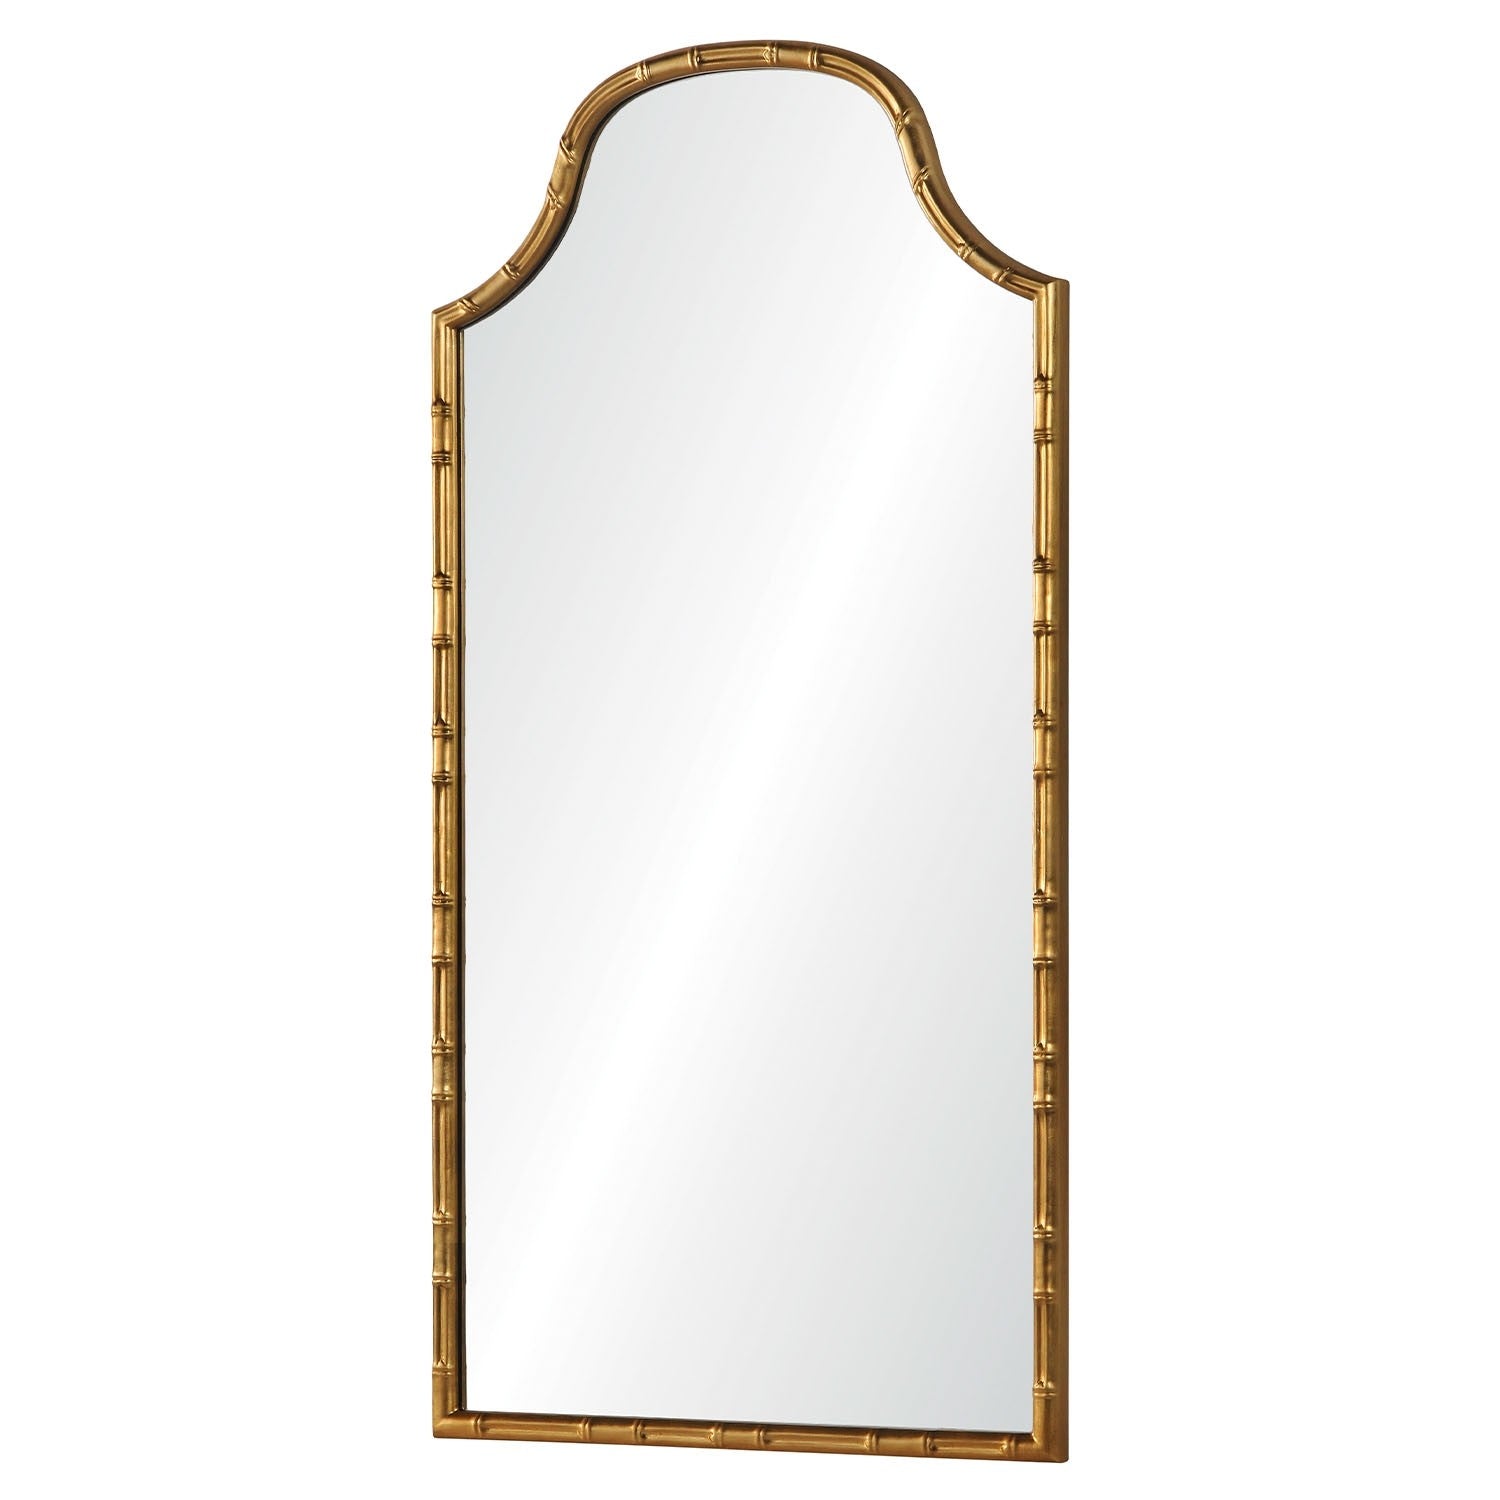 aged gold leaf mirror side view